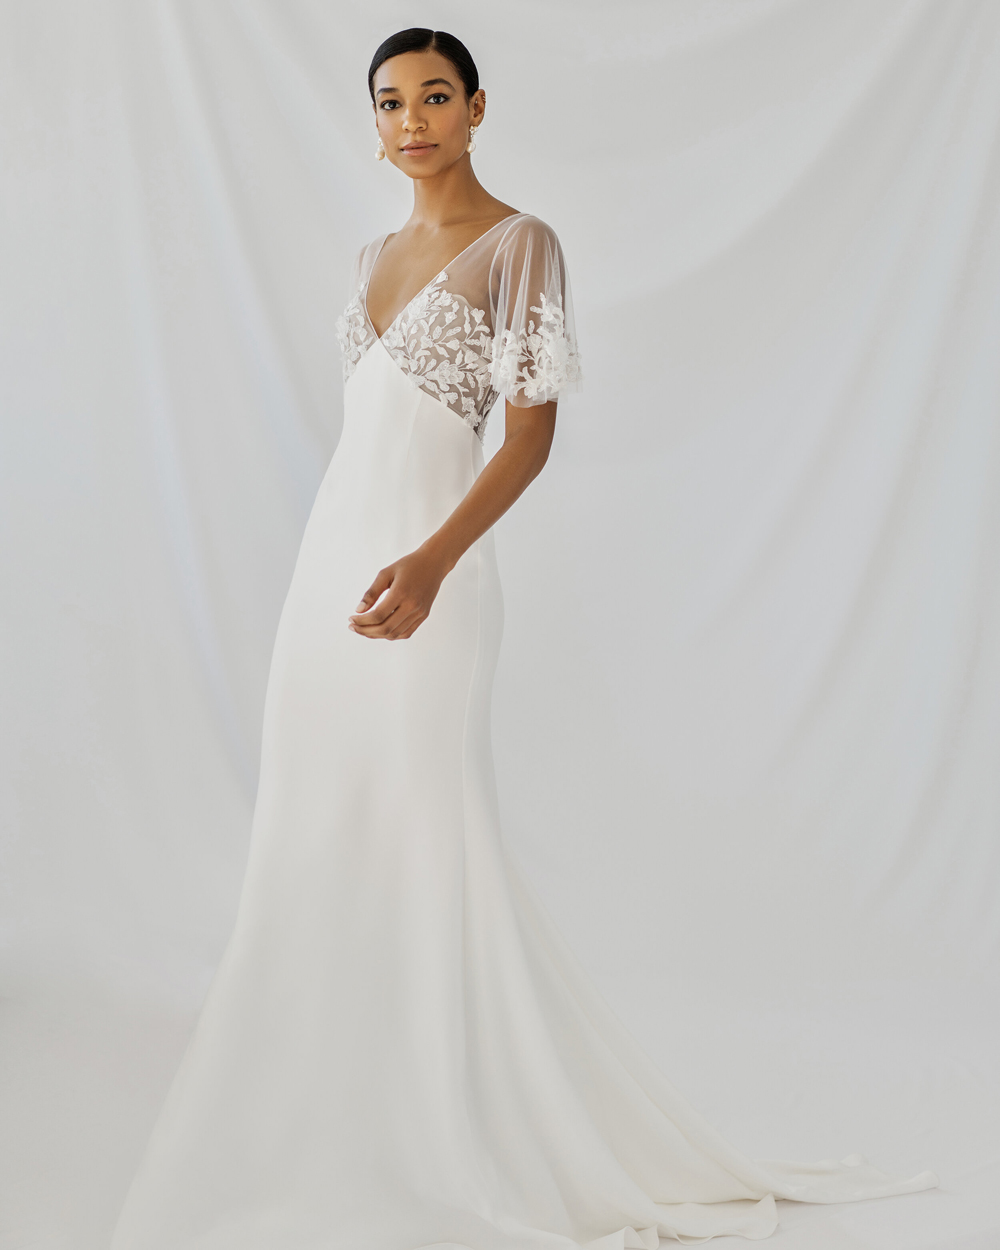 Cassia Gown Inspired By Bridal 2021 Botanica Part Two By Alexandra Grecco